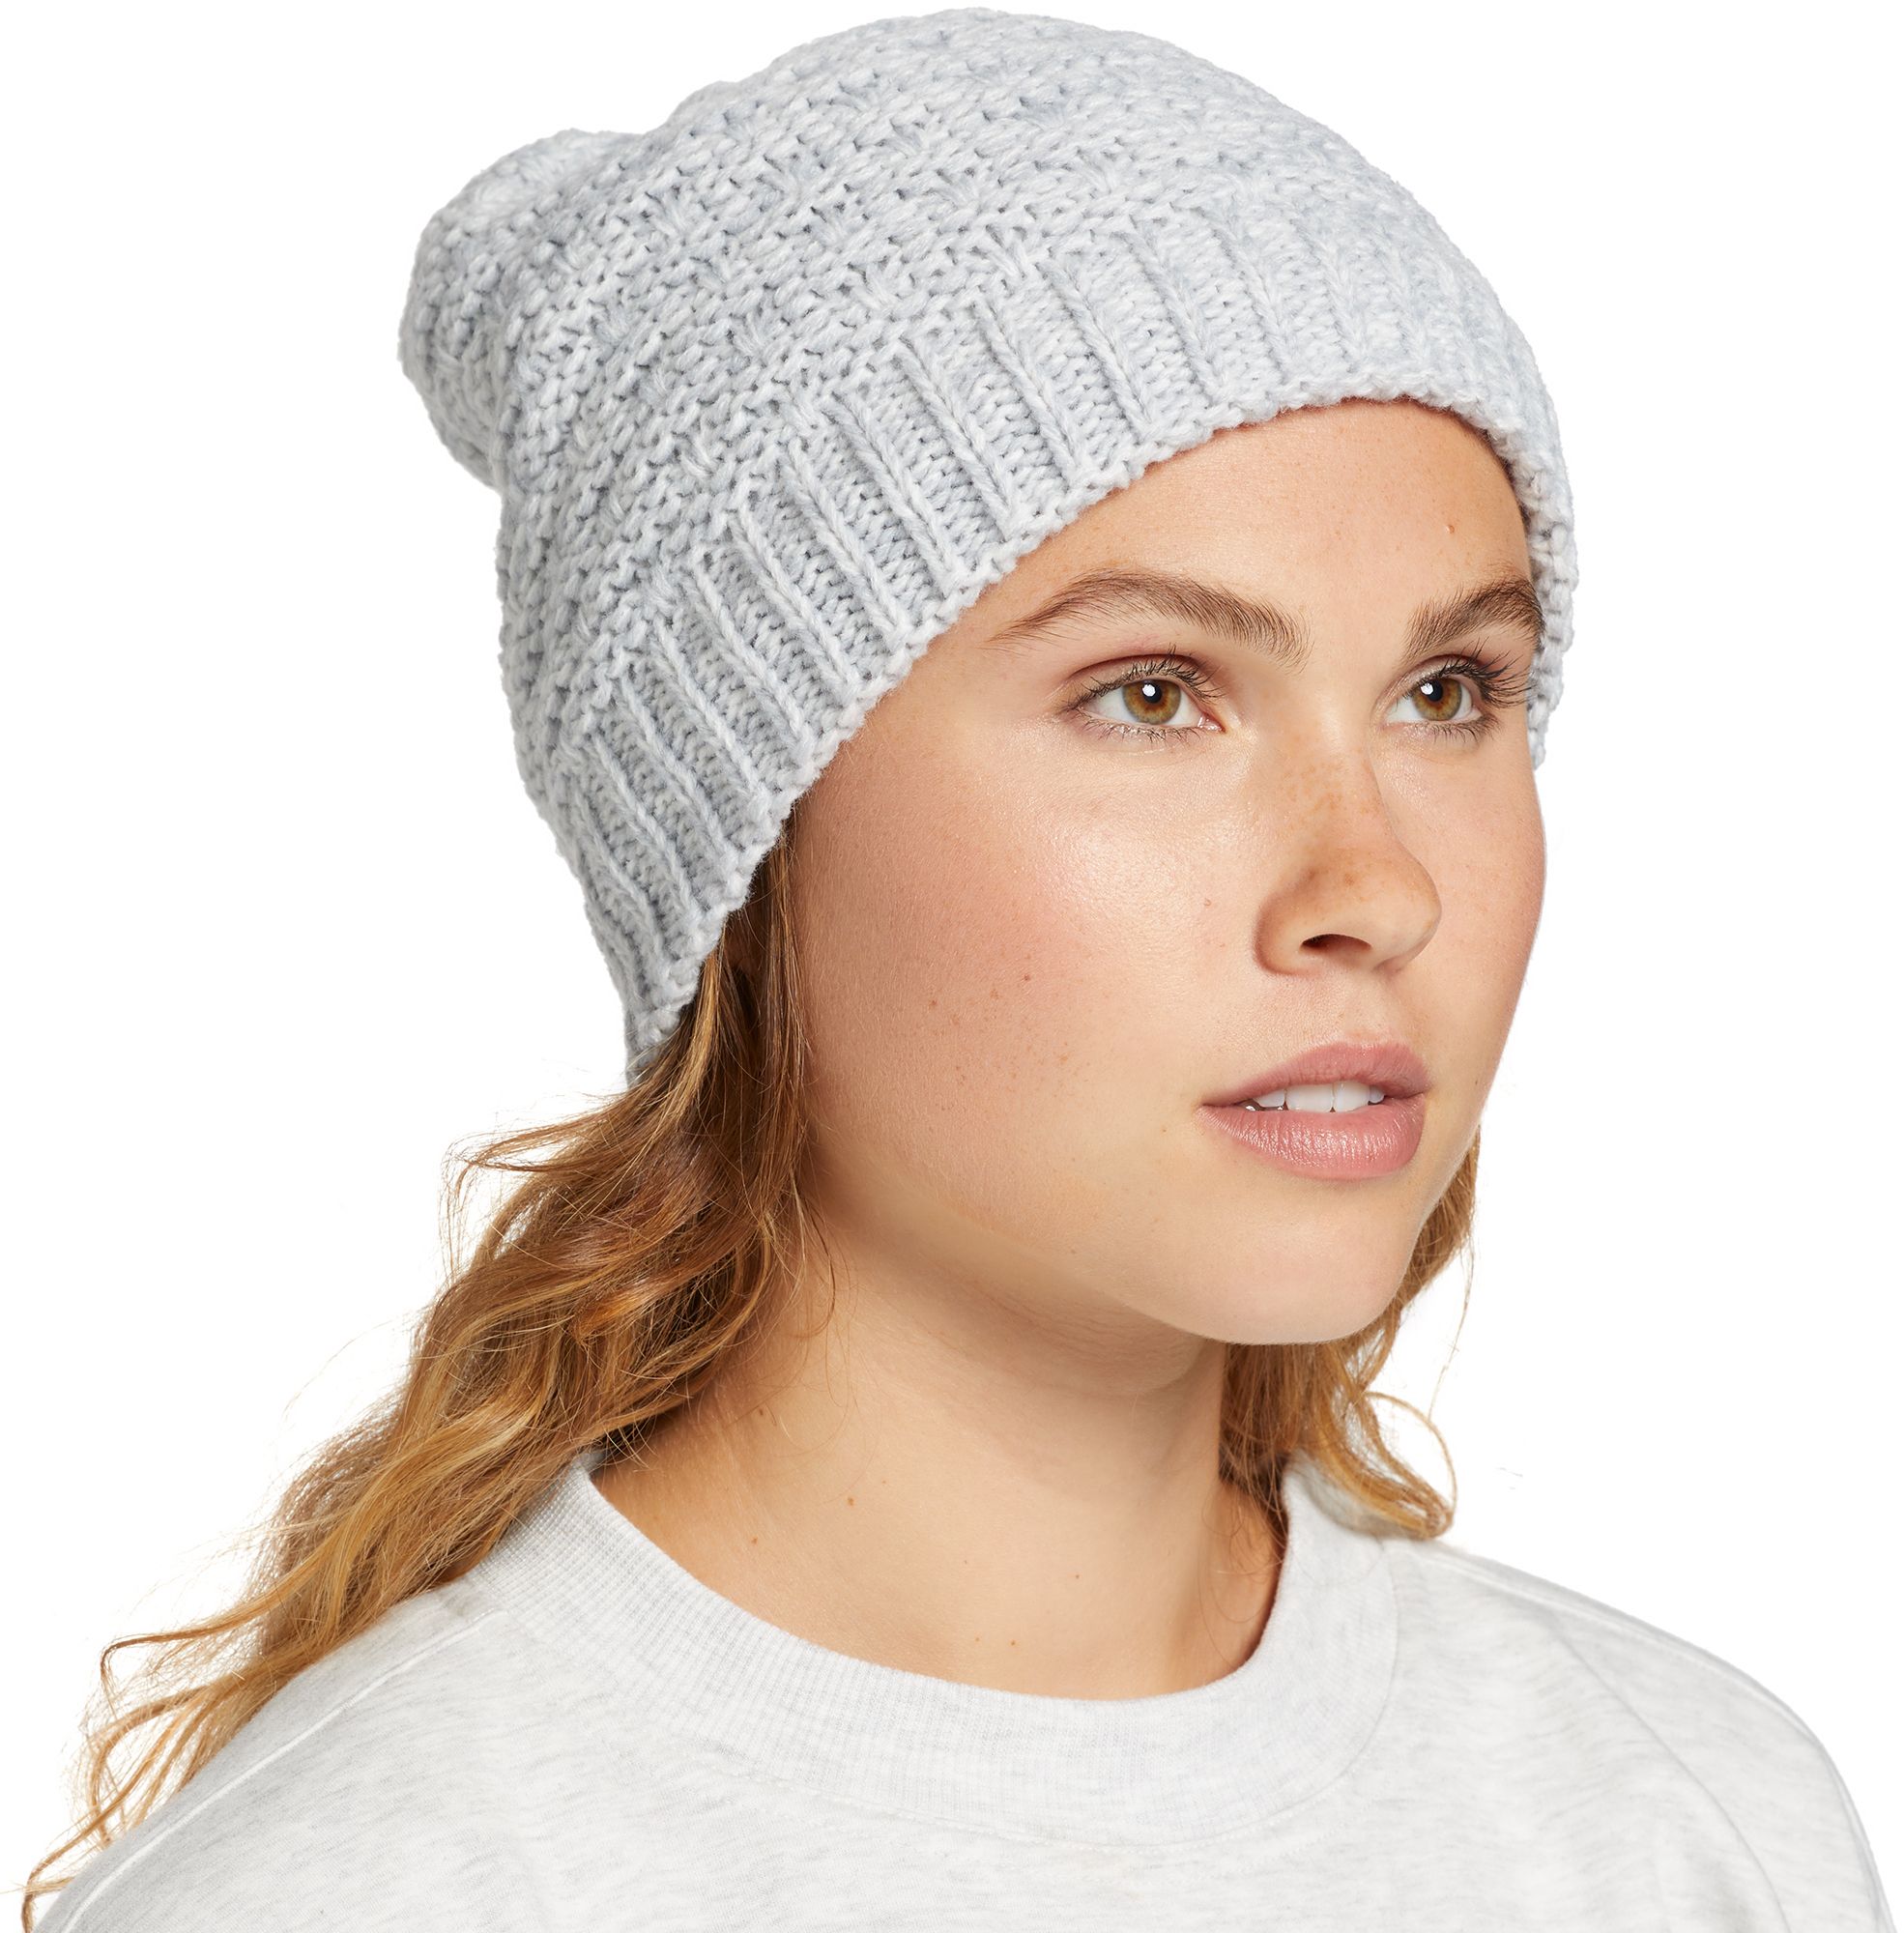 Northeast Outfitters Womens Bead Stitch Beanie